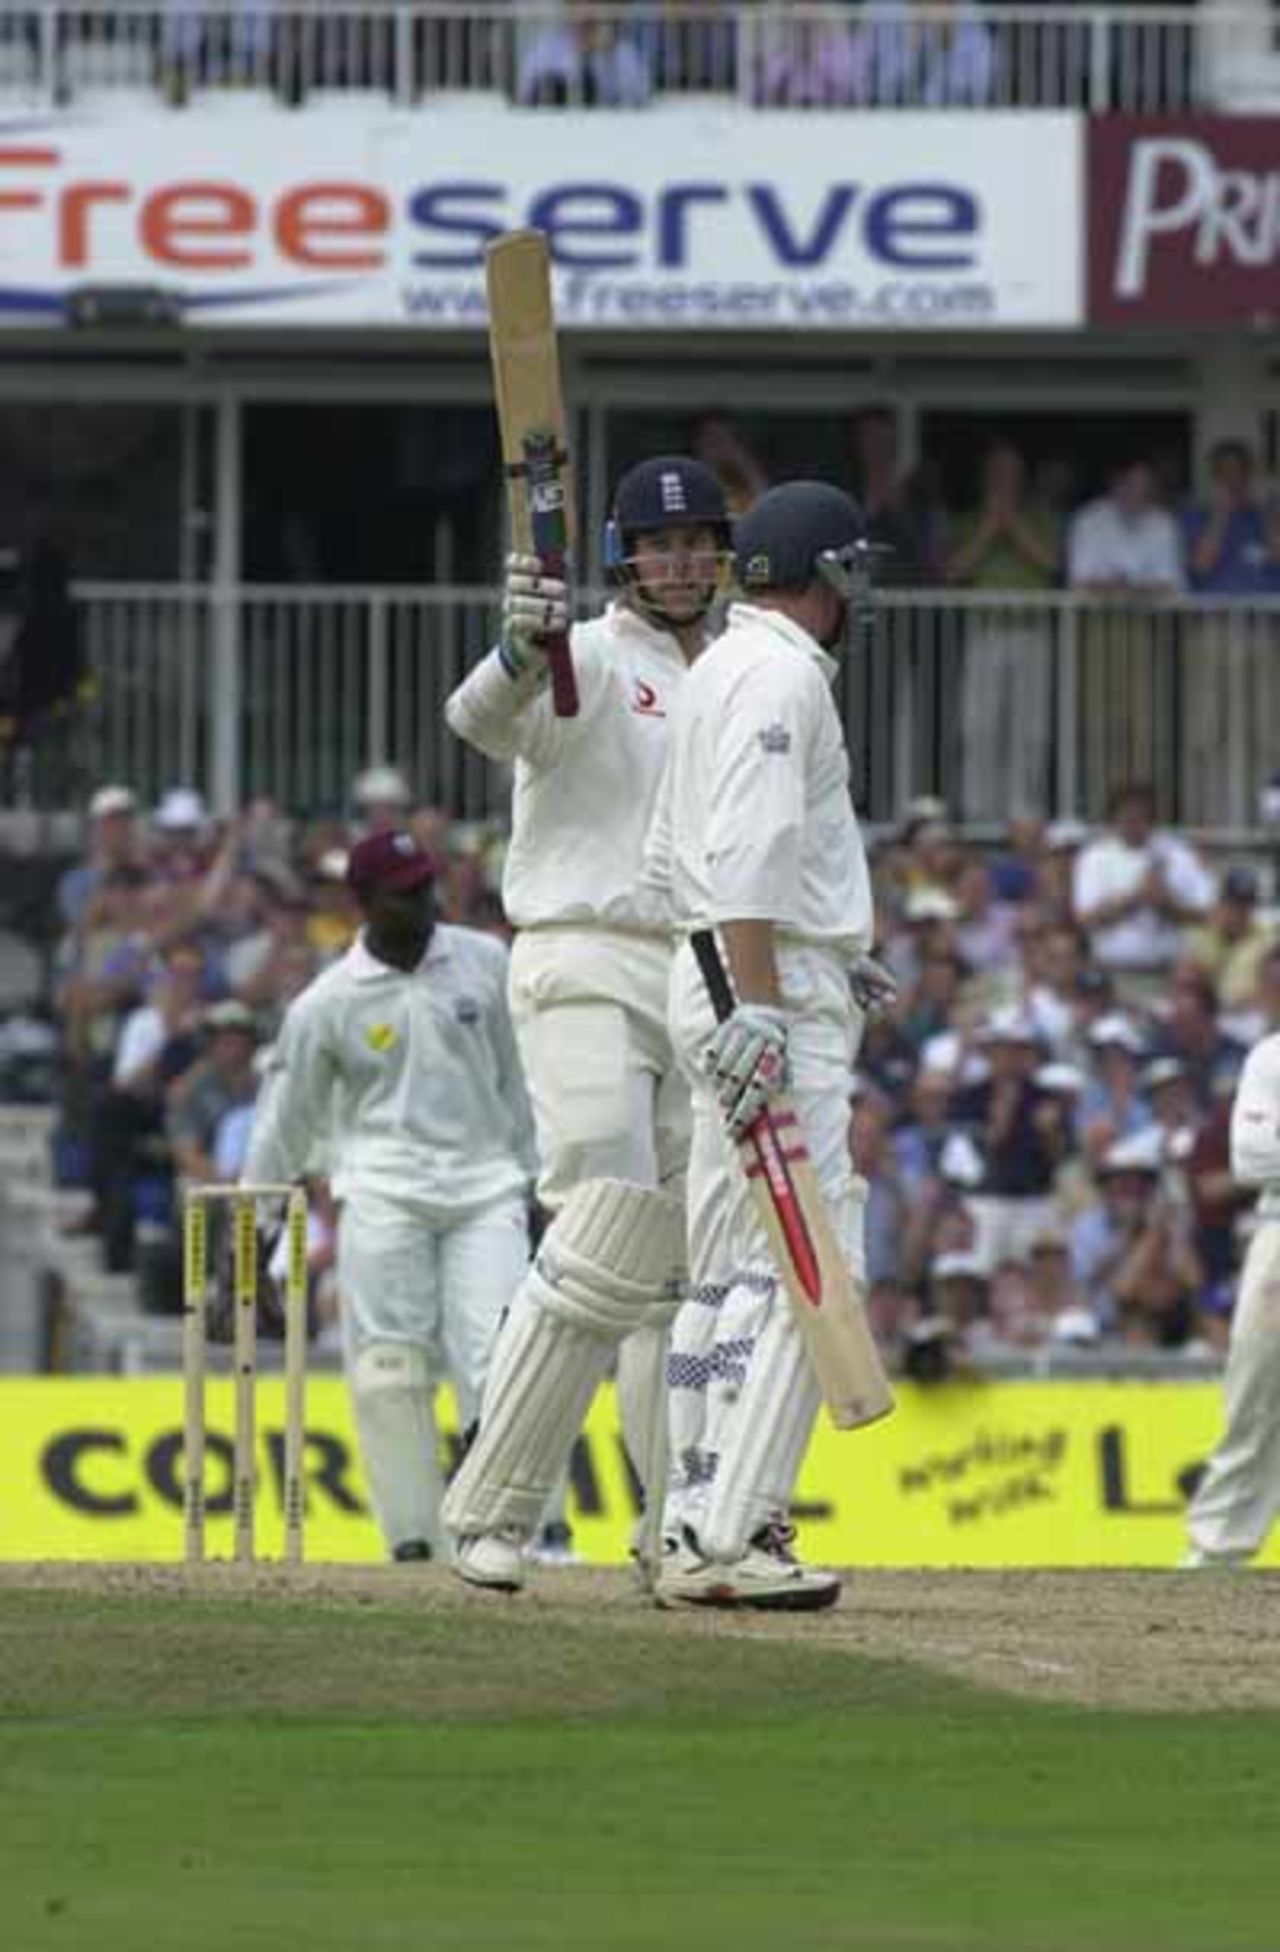 The 5th and last test of the Series of 2000